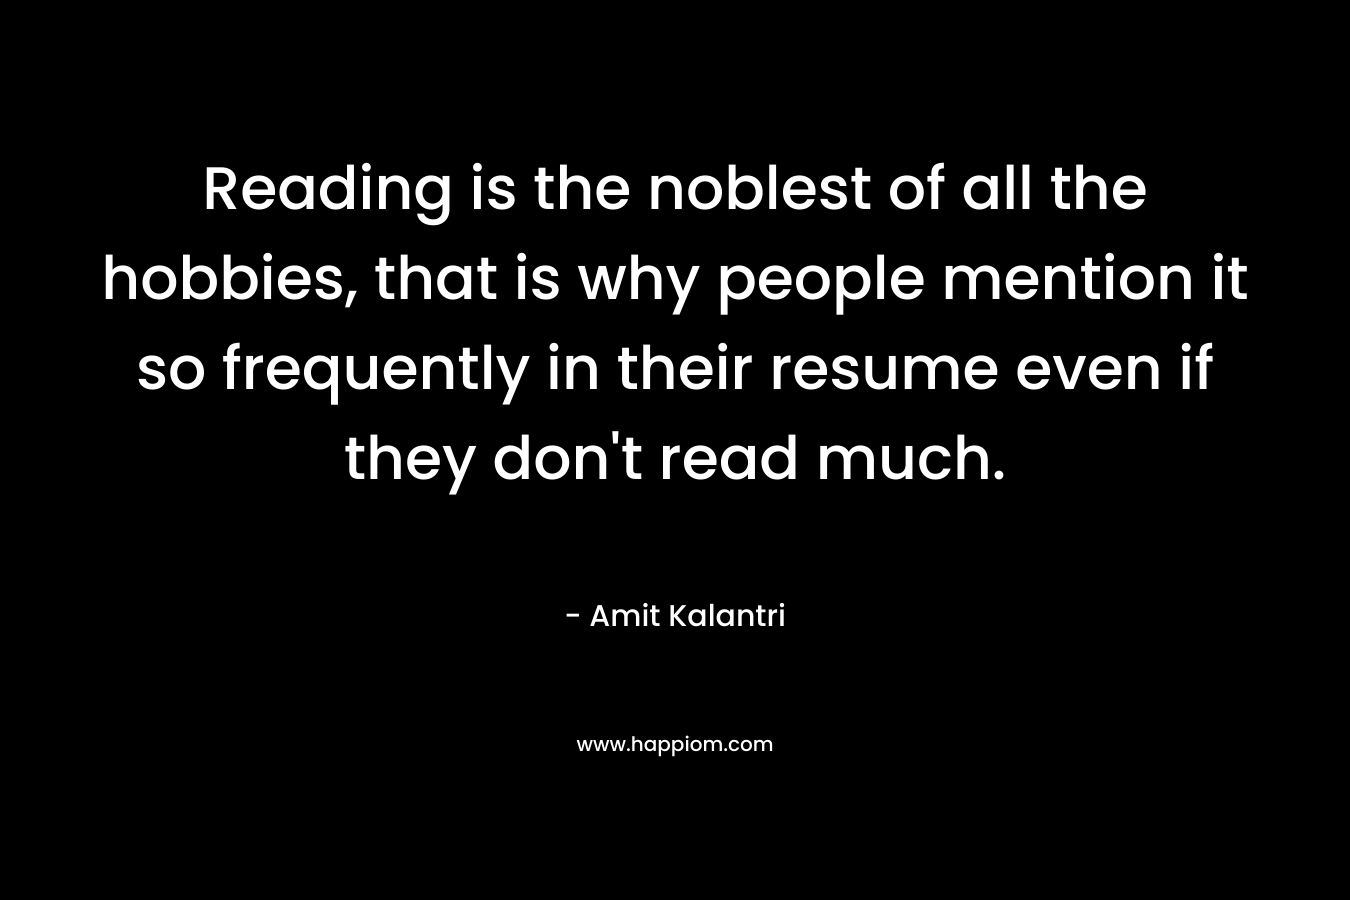 Reading is the noblest of all the hobbies, that is why people mention it so frequently in their resume even if they don’t read much. – Amit Kalantri